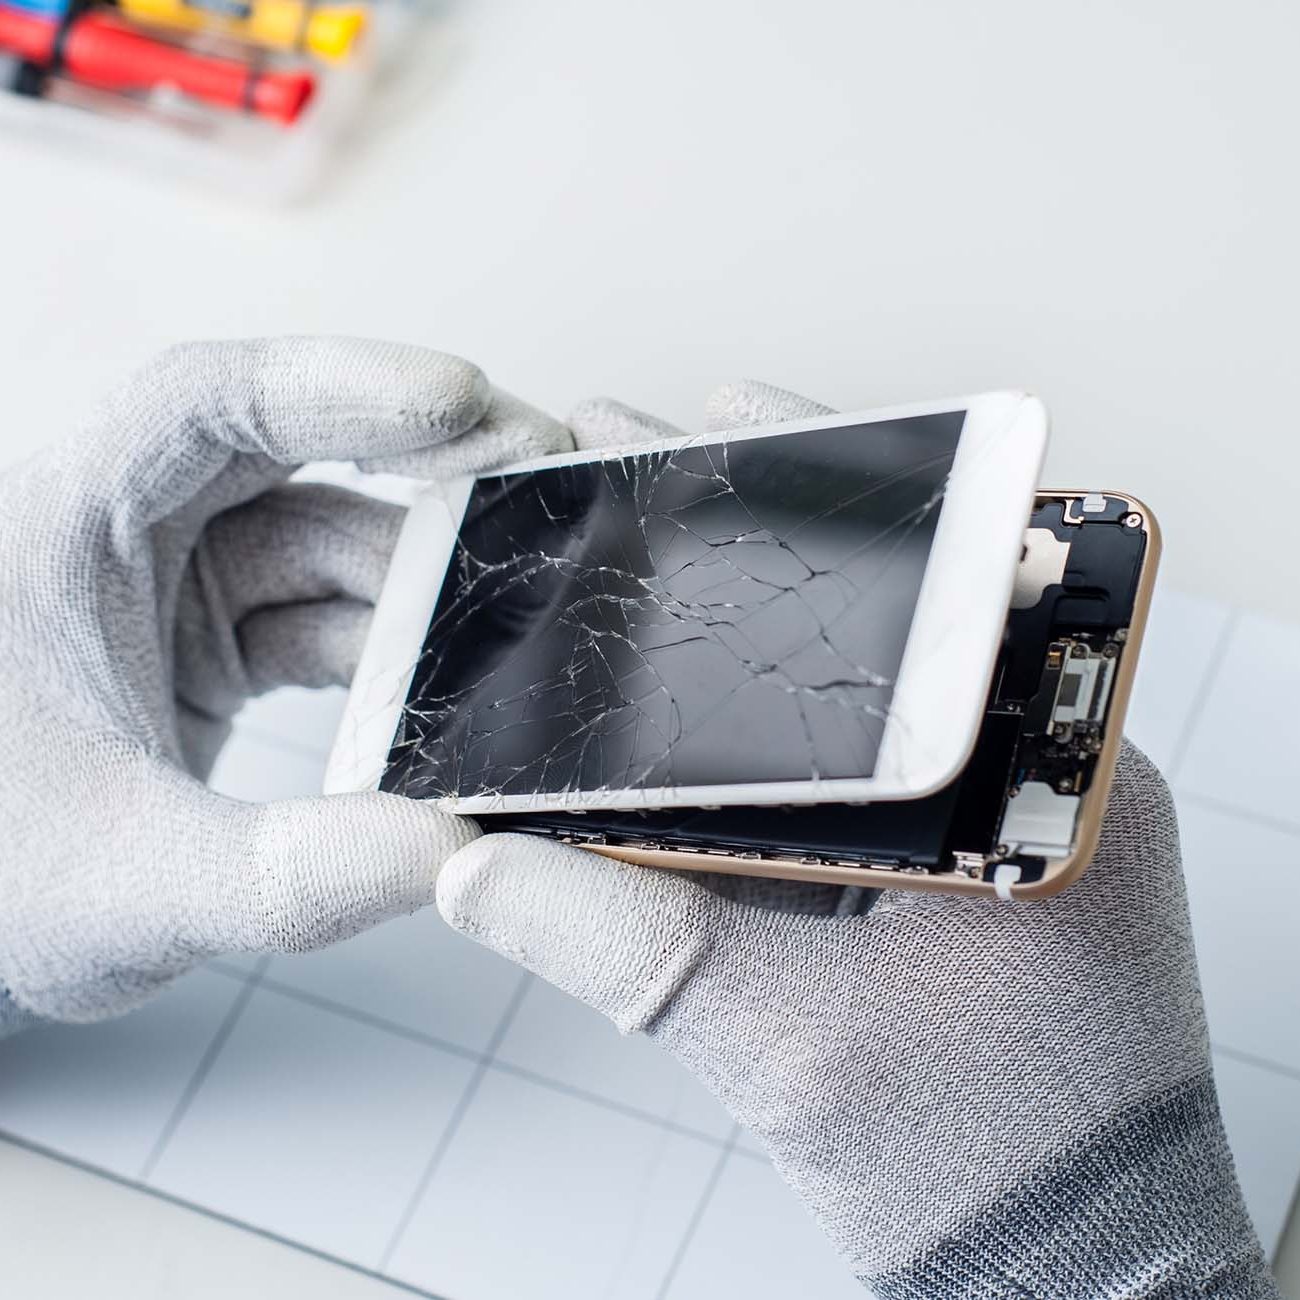 Close-up photos showing process of mobile phone repair, changing the screen.